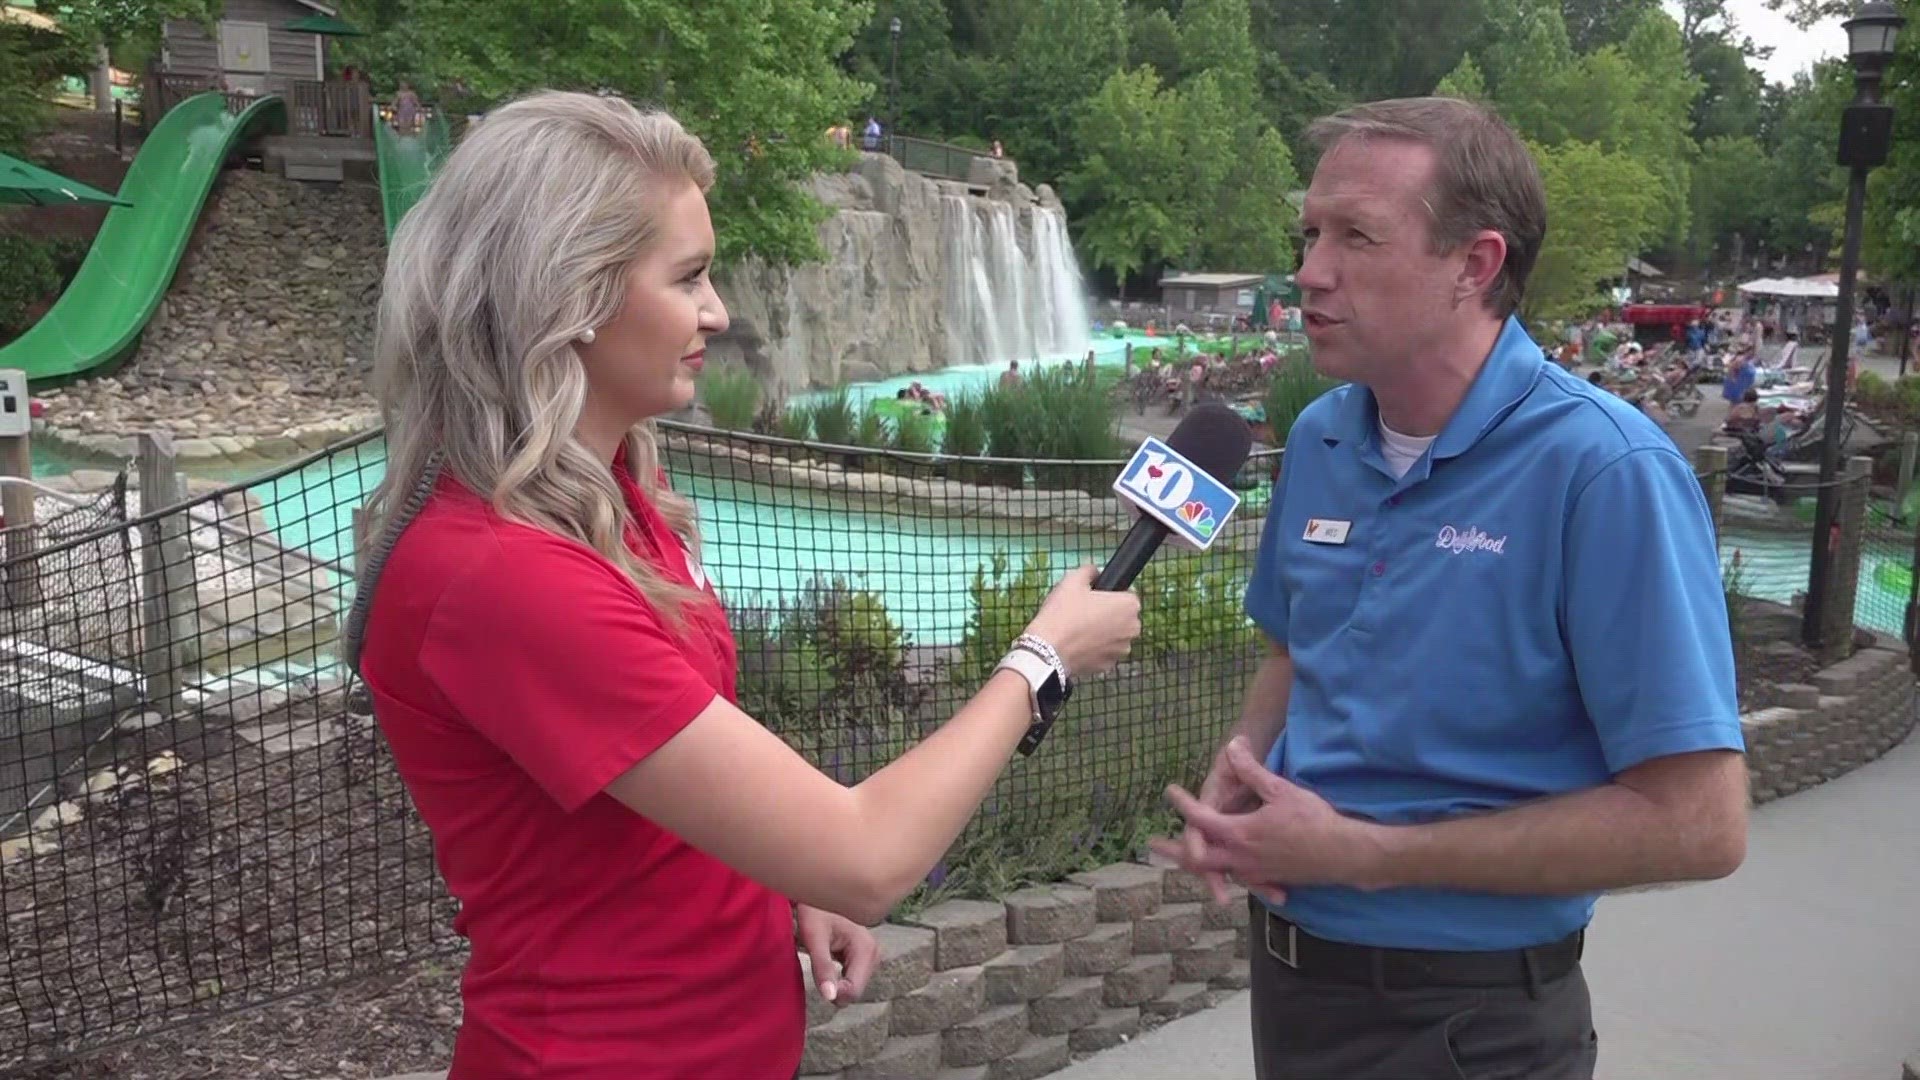 You can visit Dollywood's Splash Country for a $5 donation to Sevier County Food Ministries.